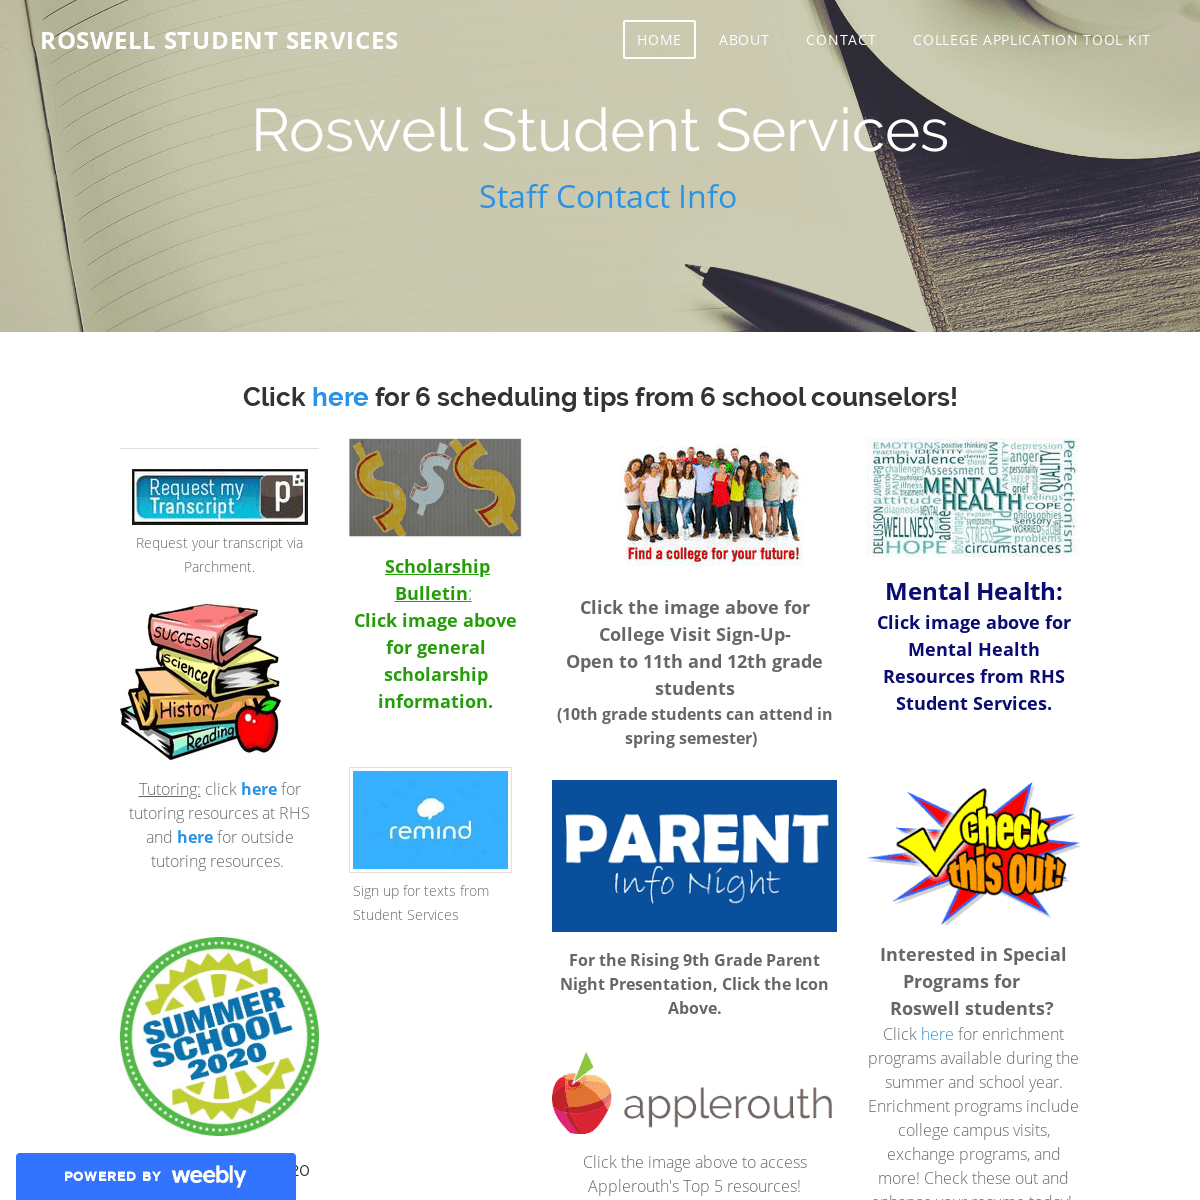 A complete backup of roswellstudentservices.weebly.com